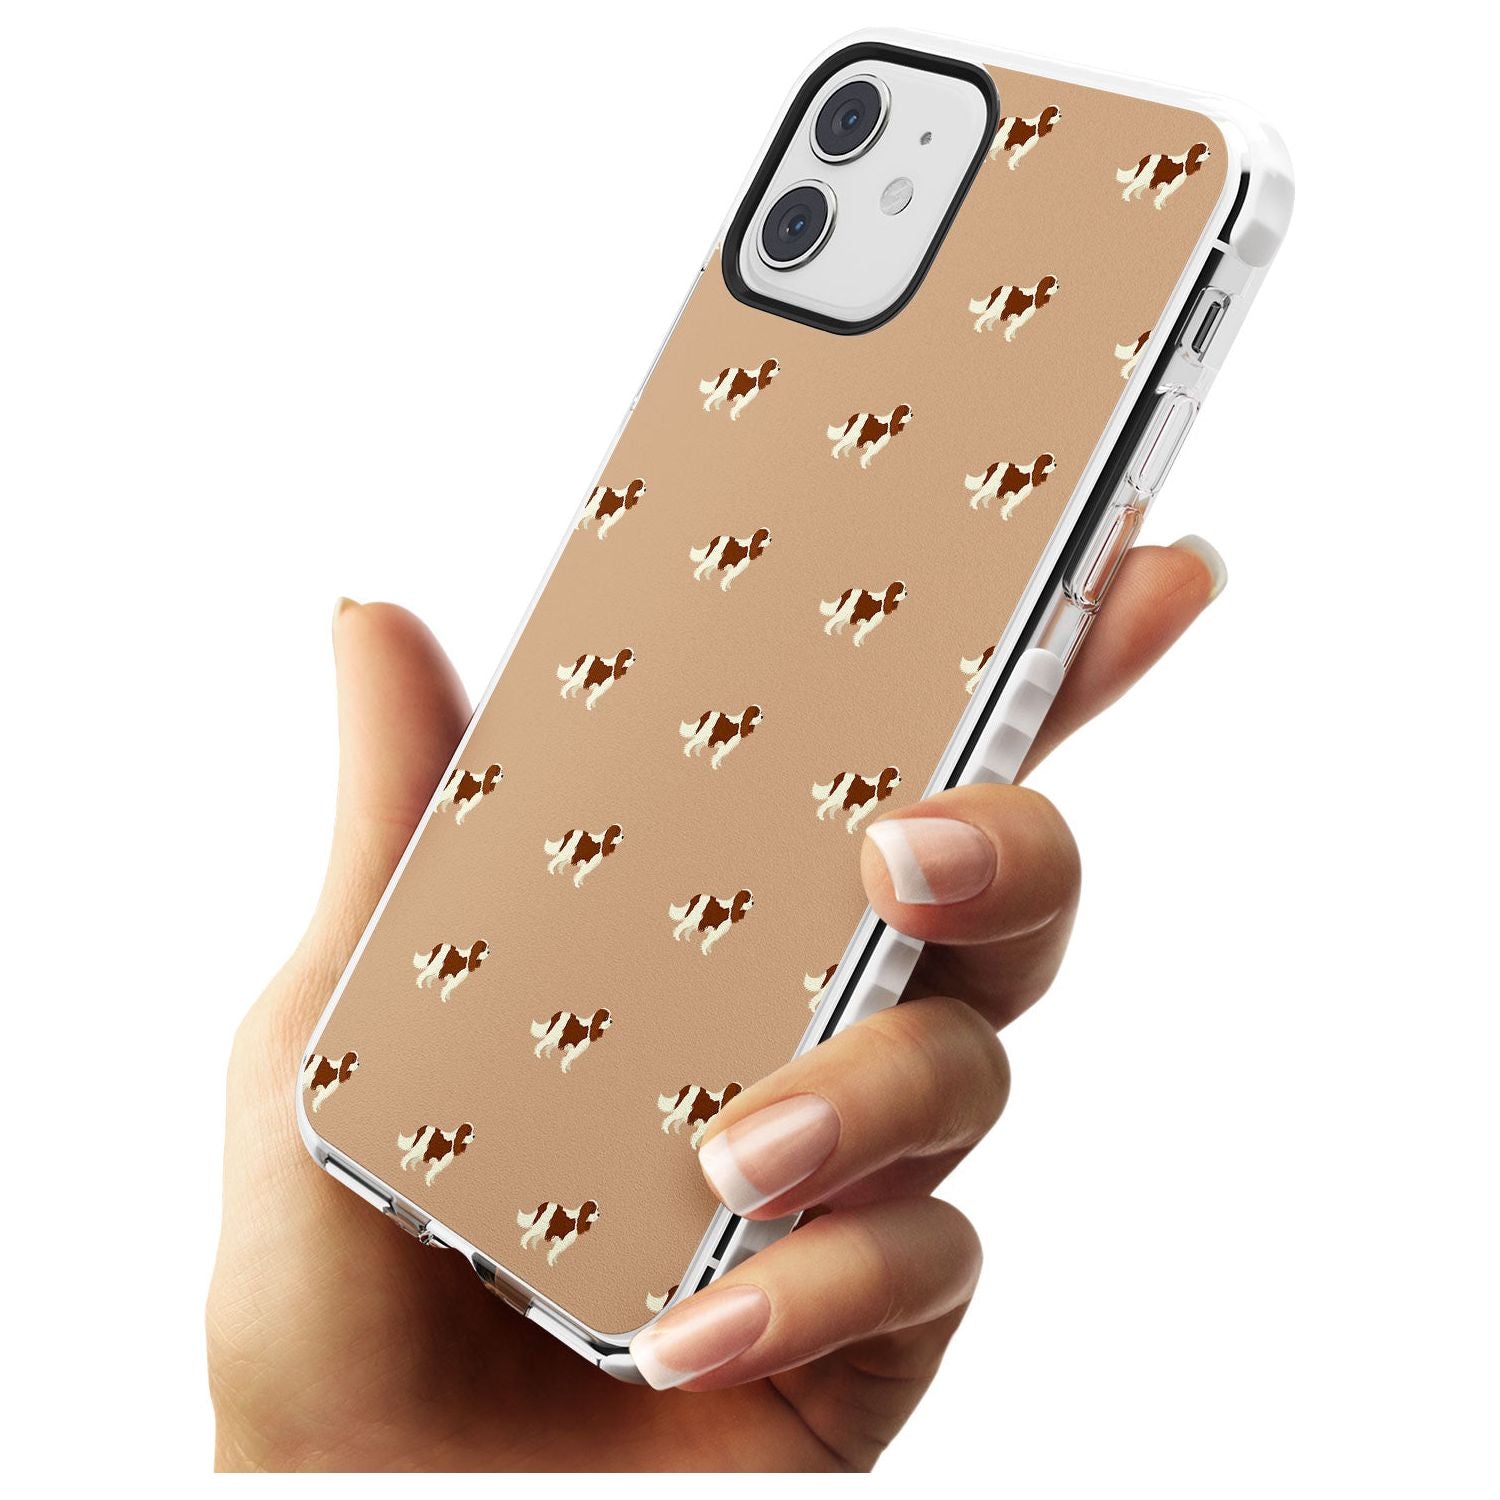 Cavalier King Charles Spaniel Pattern Impact Phone Case for iPhone 11